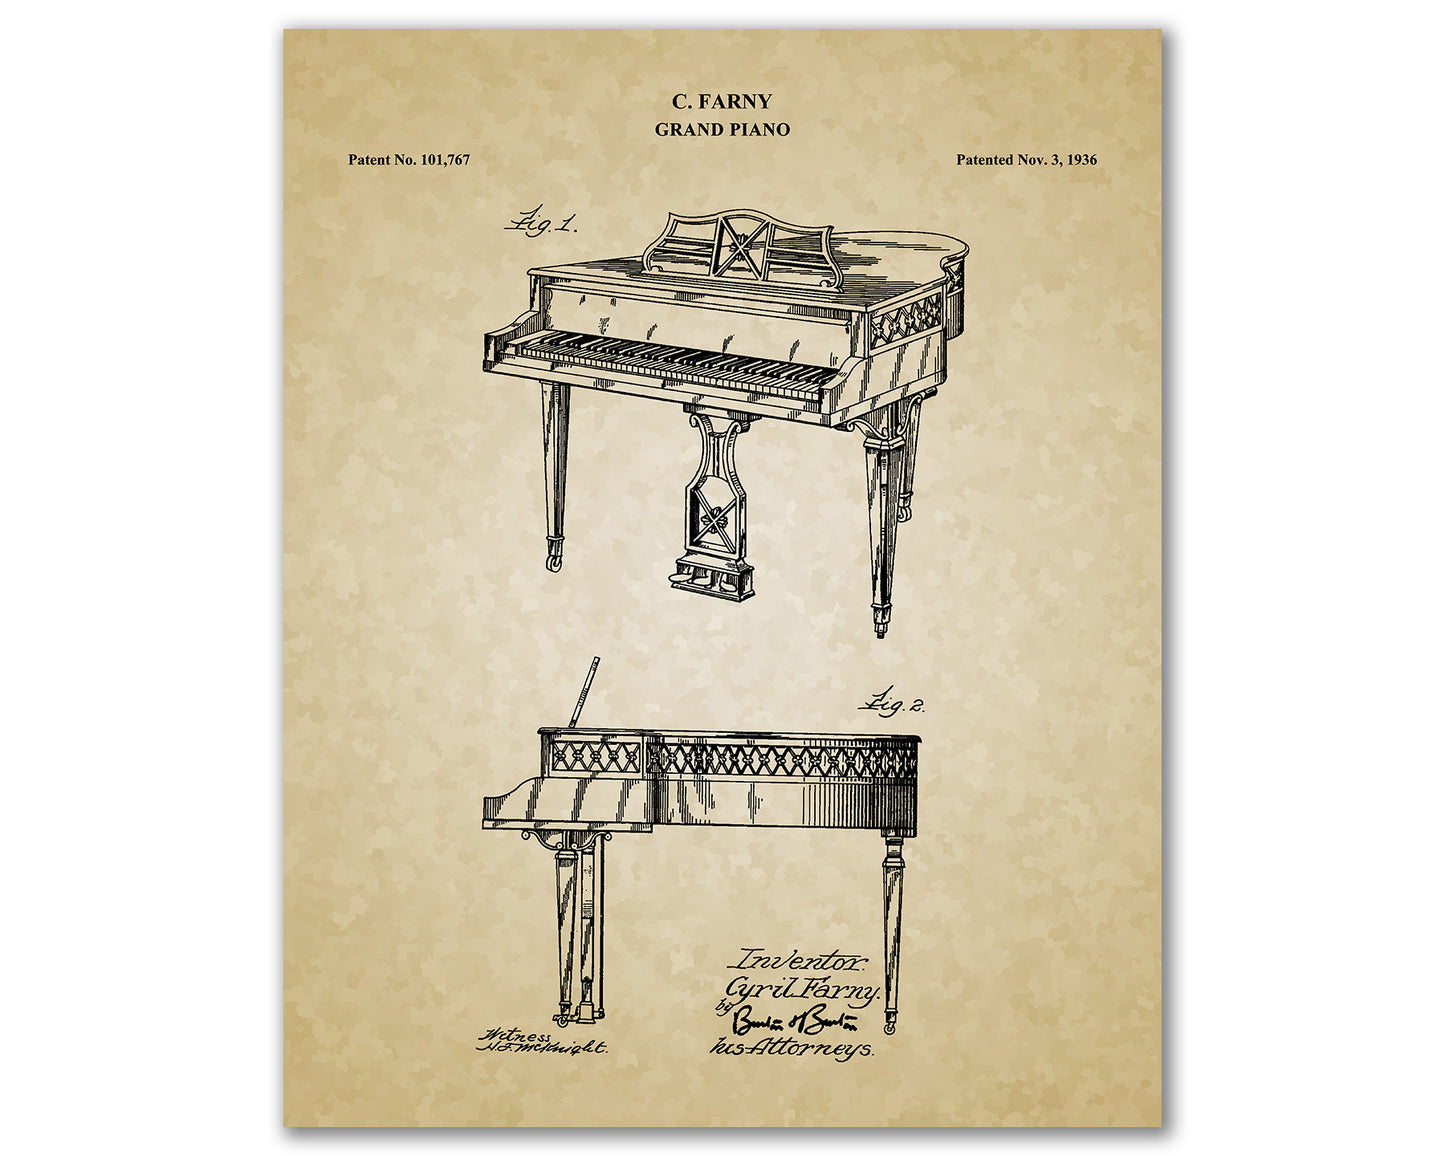 Grand Piano Patent Drawings, Wall Art Poster - Great Vintage Room Decor - Art Prints - Unique Gift for Musician\Music Enthusiast 03012